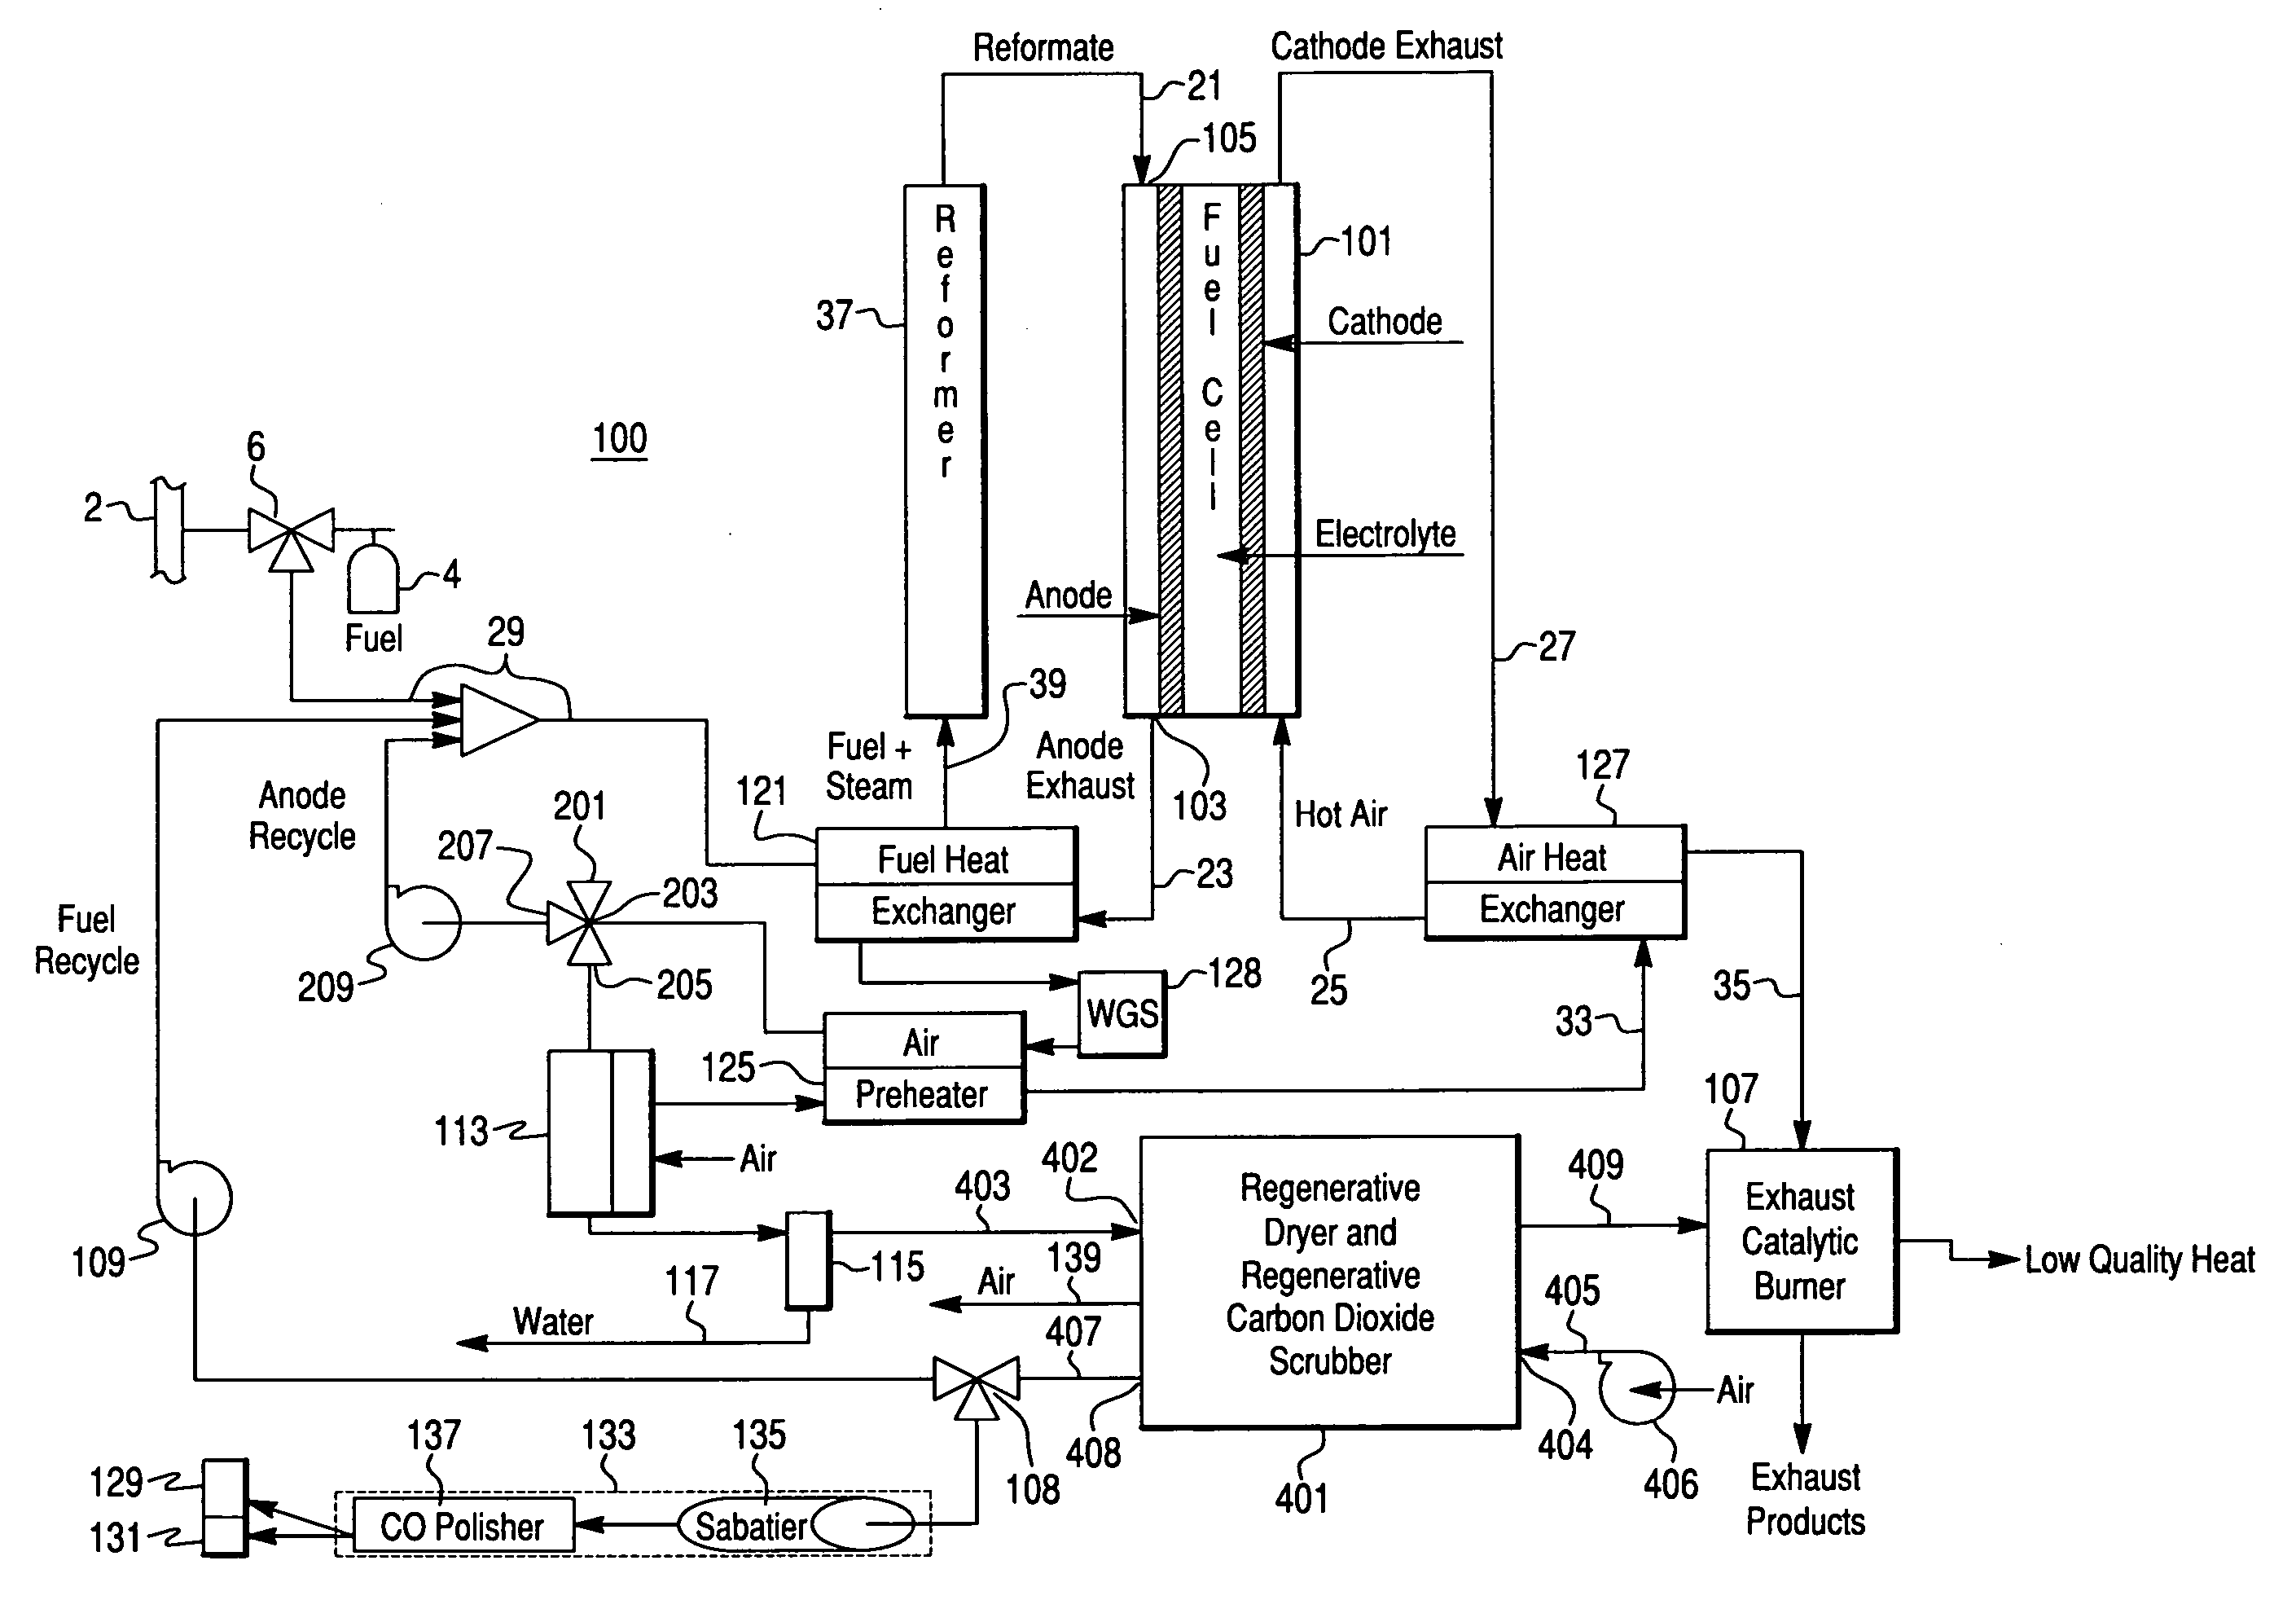 Flexible fuel cell system configuration to handle multiple fuels